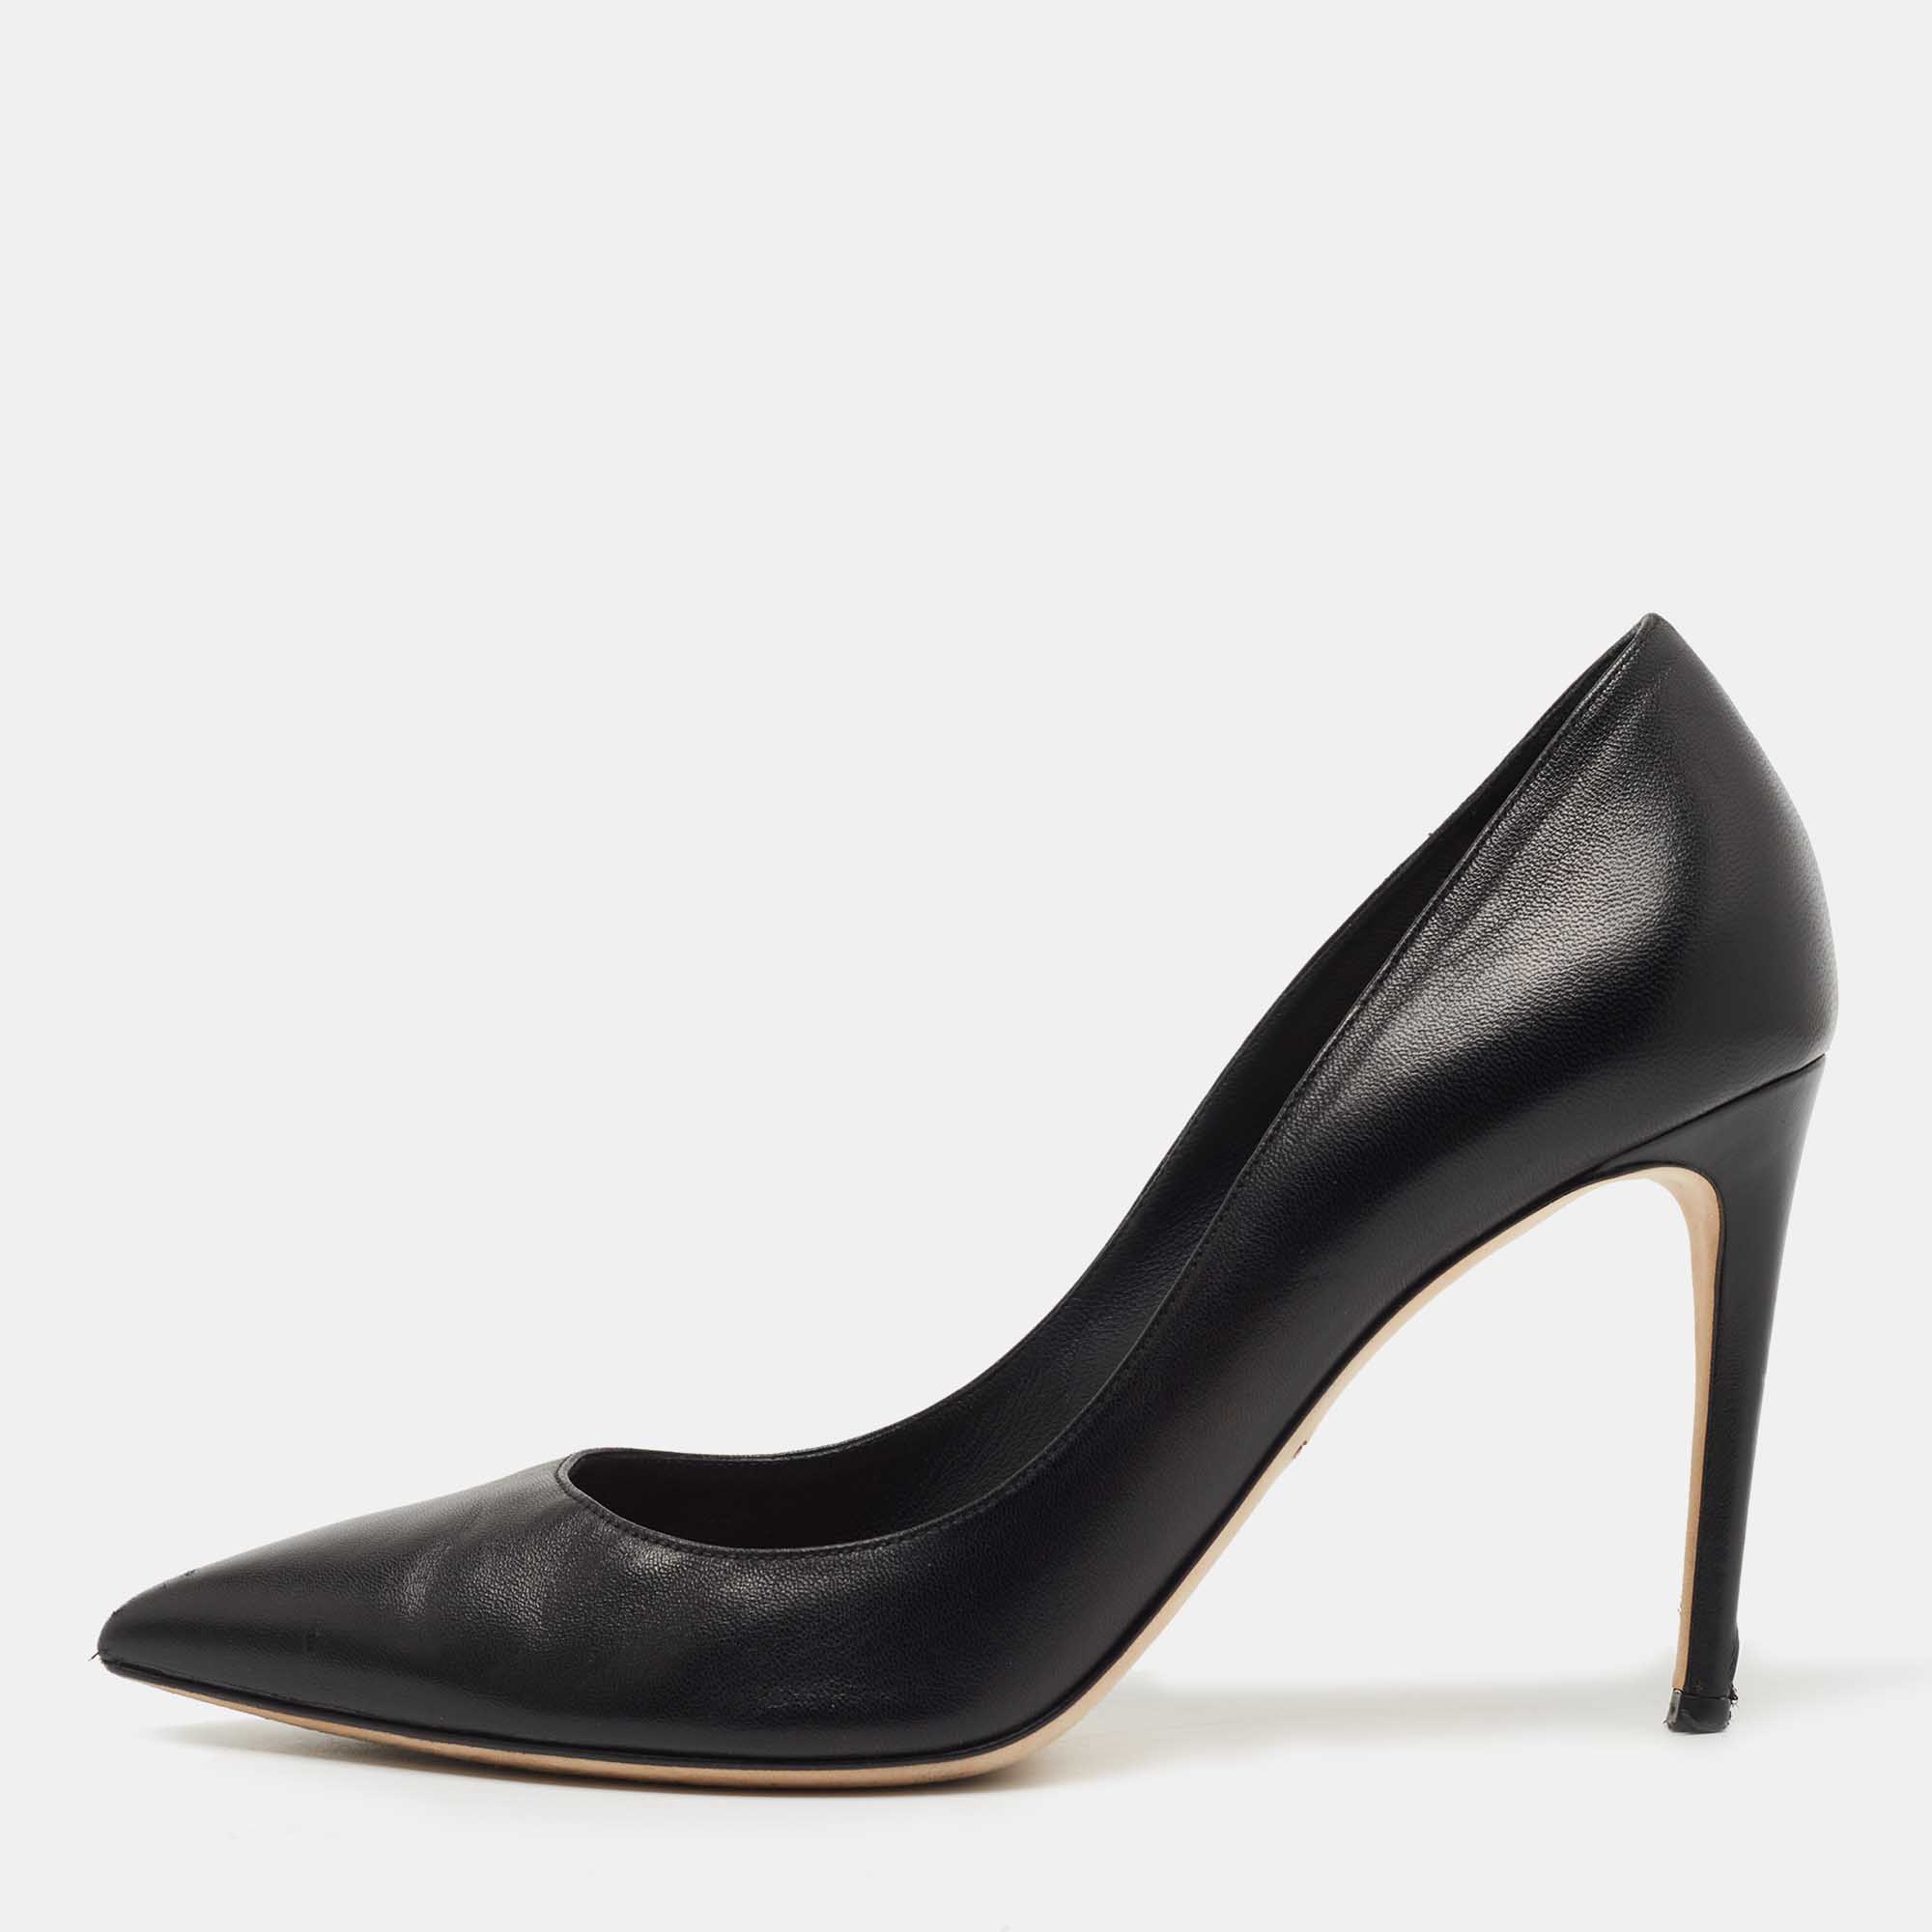 Dolce & gabbana black leather pointed toe pumps size 40